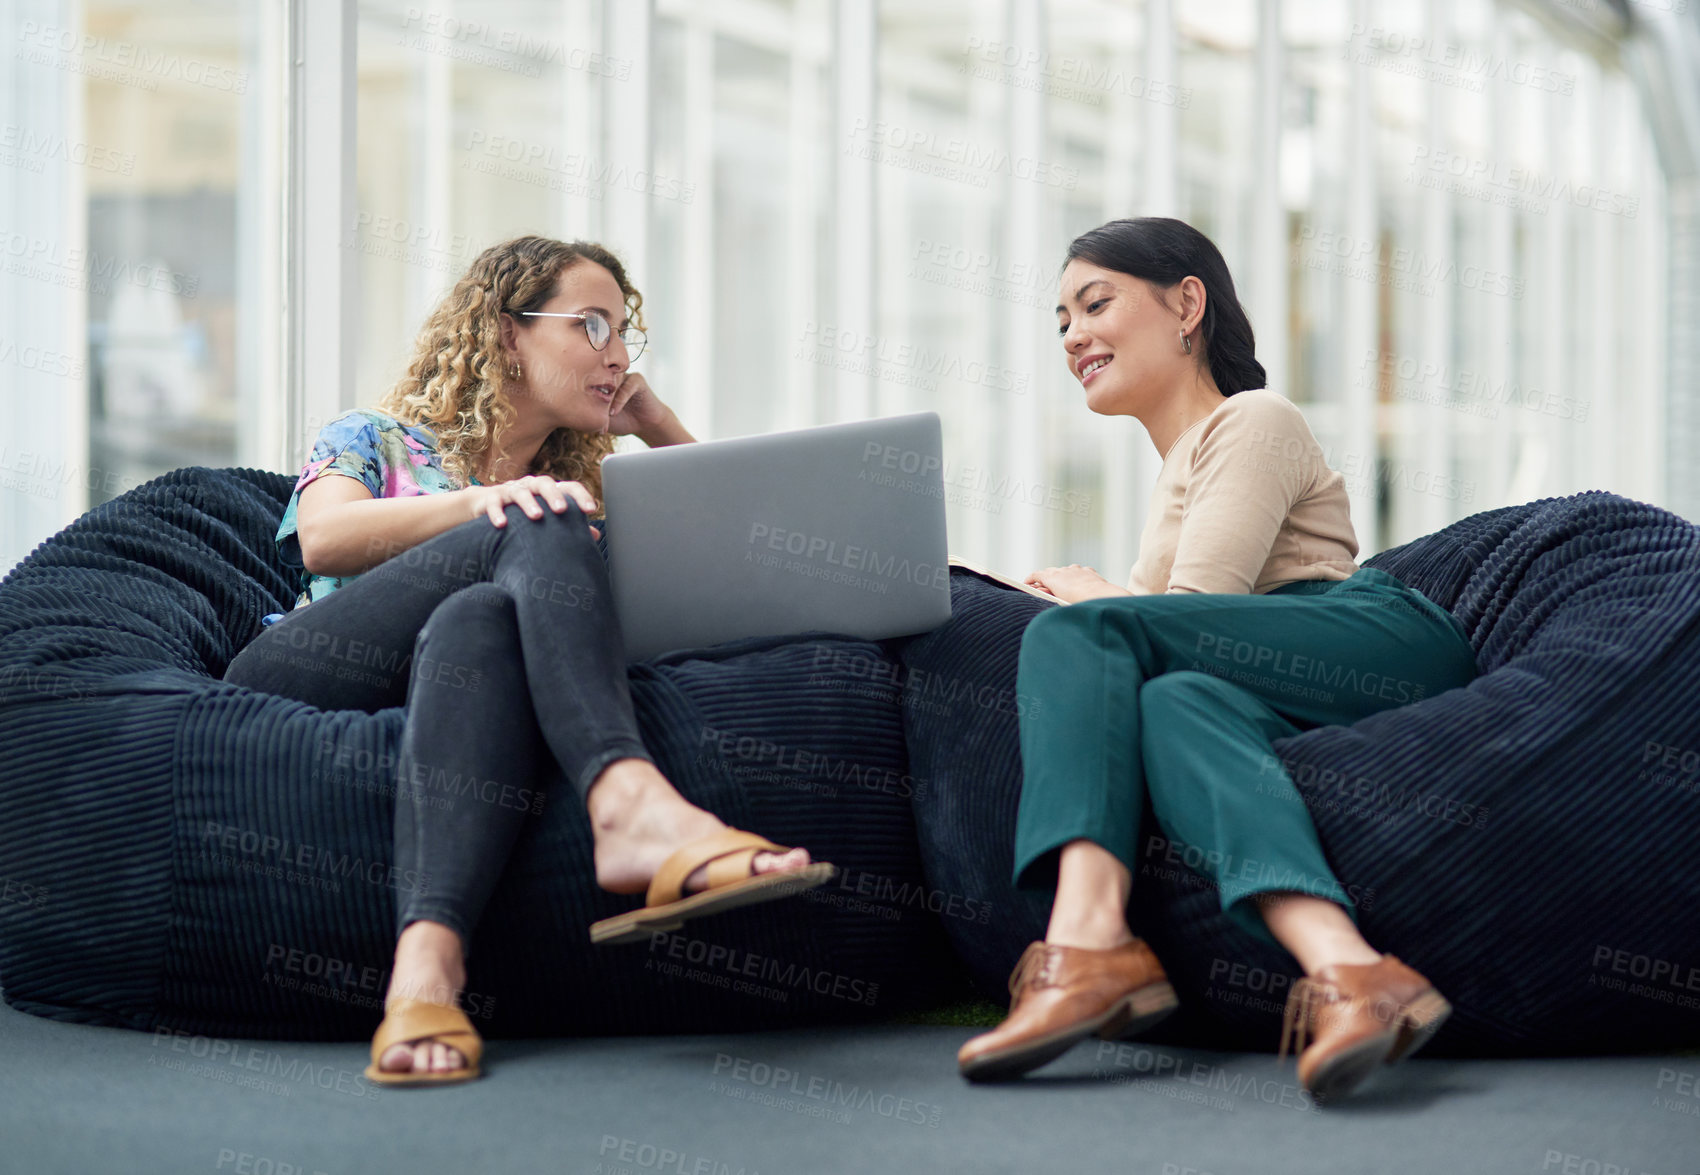 Buy stock photo Shot of two businesswomen using a laptop together while sitting on beanbags in an office